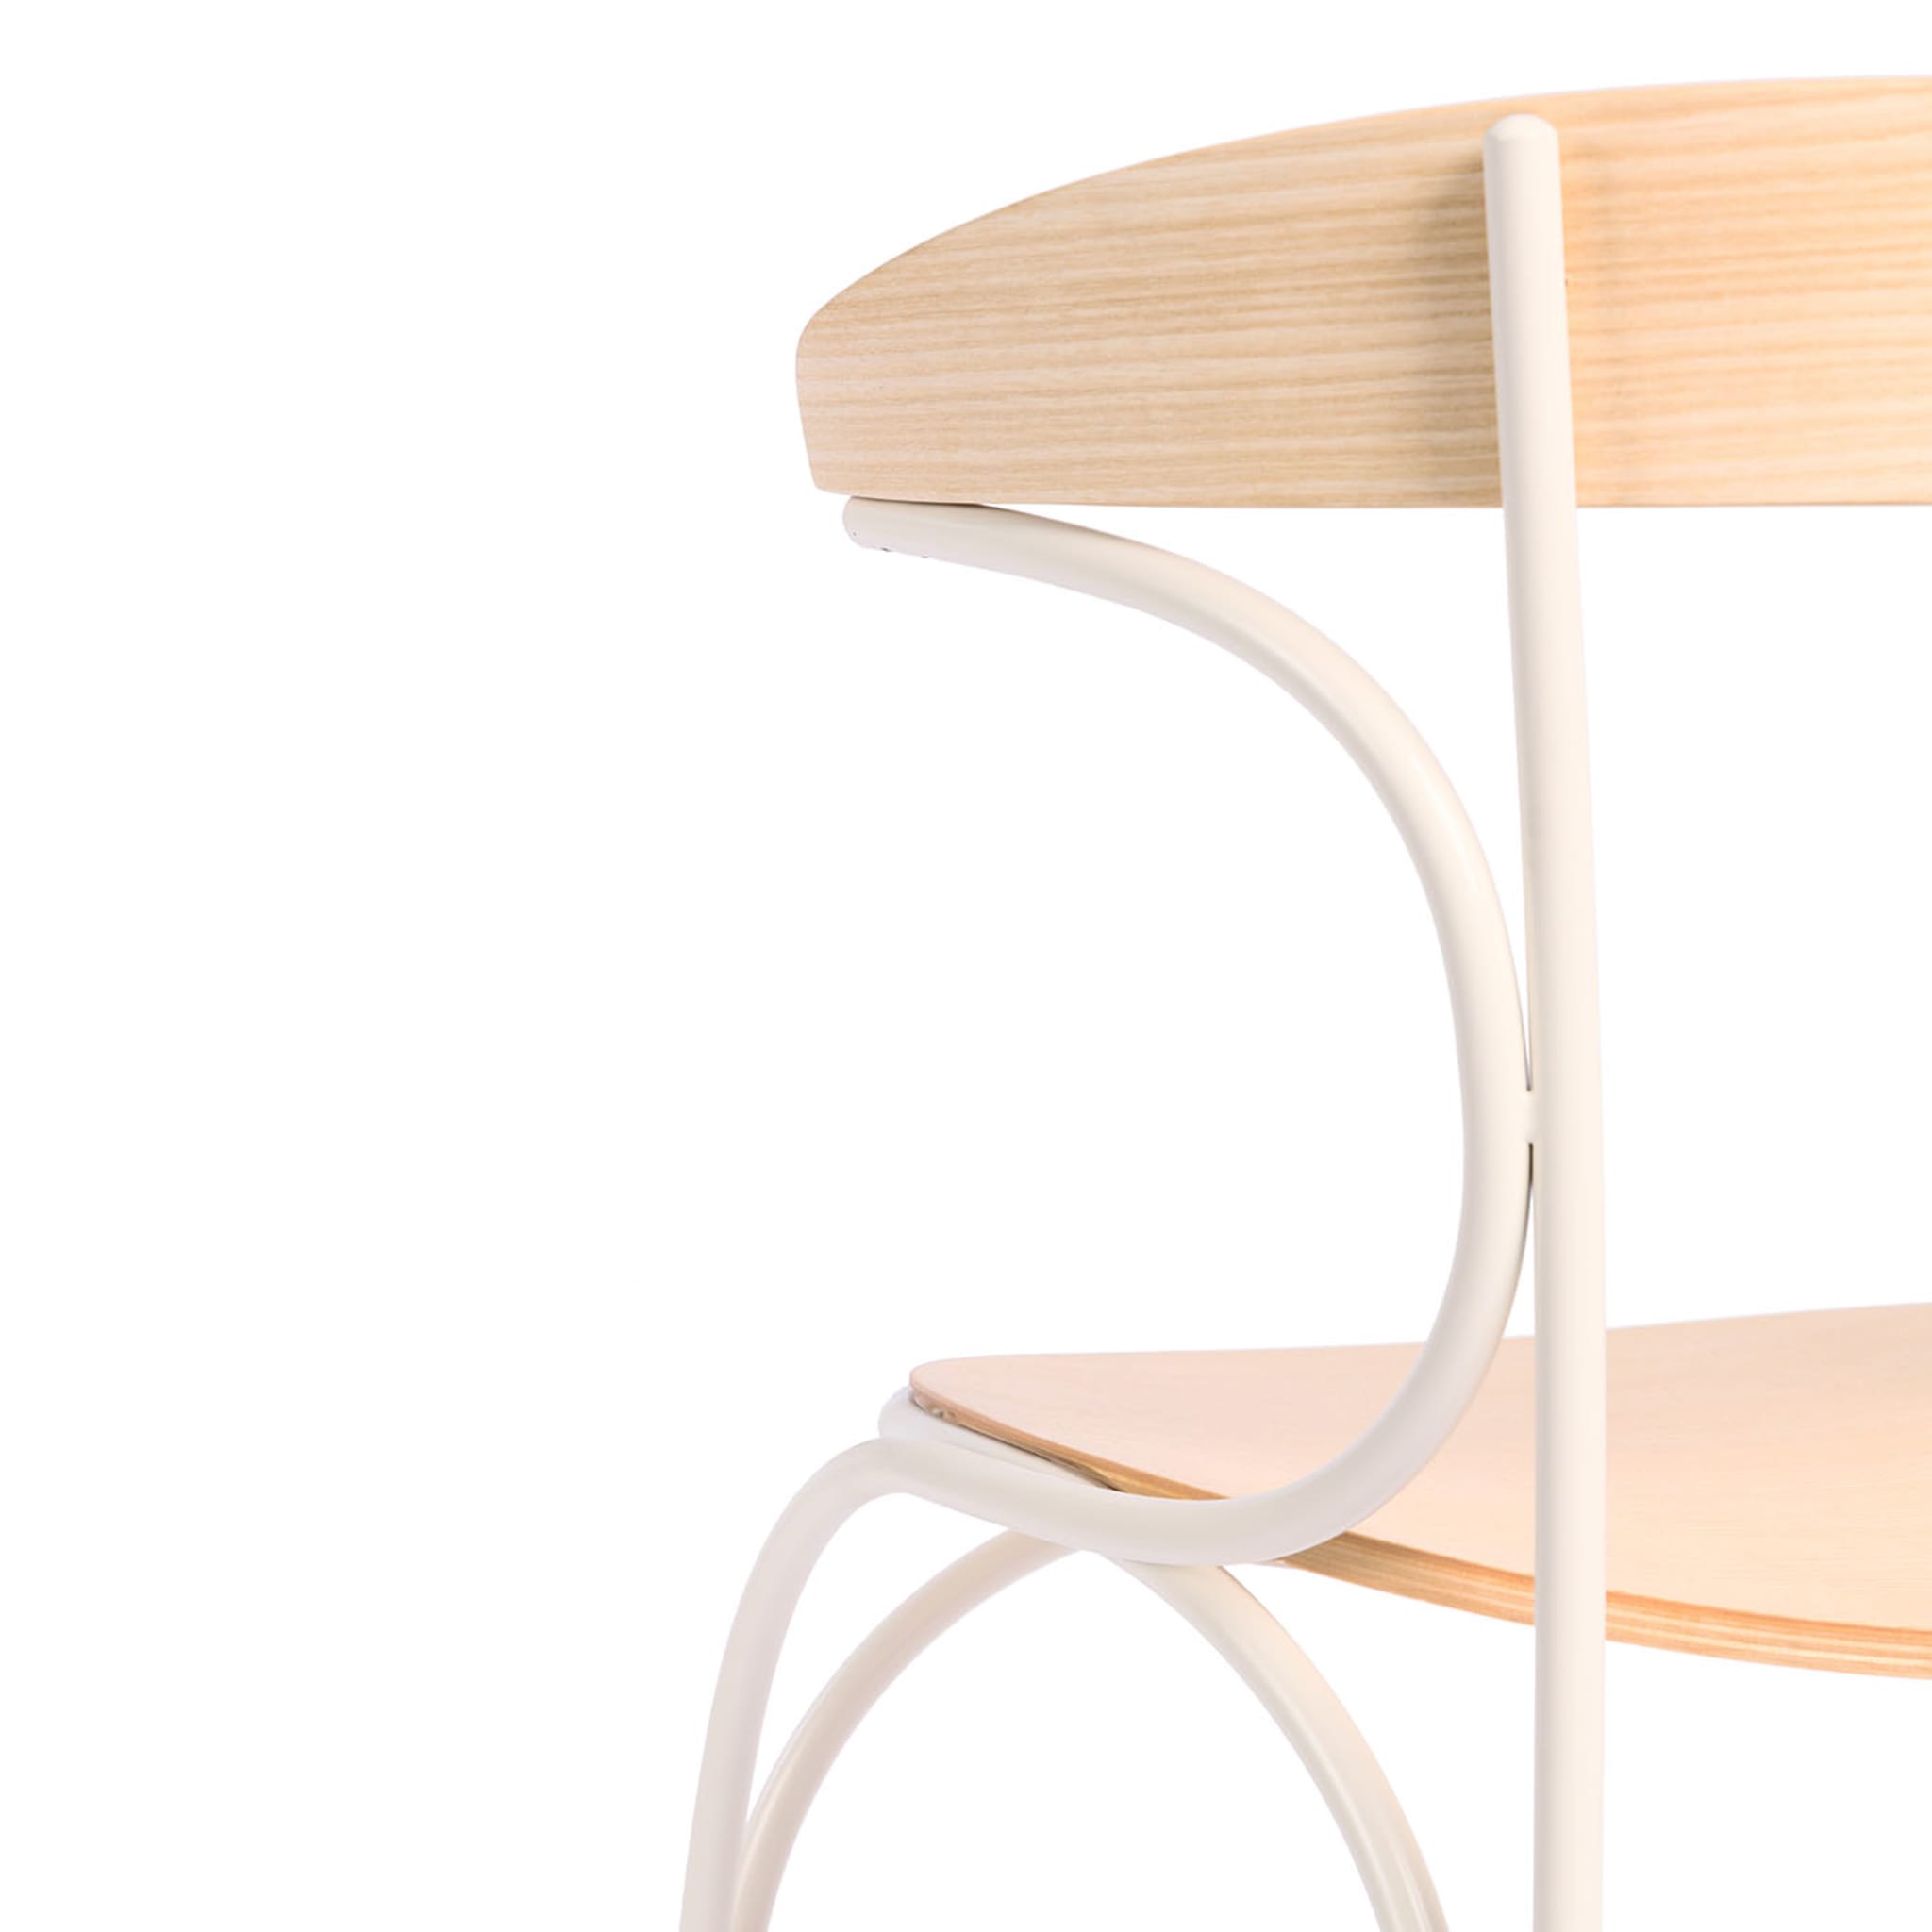 Ample Natural Chair by Nichetto Studio - Alternative view 4